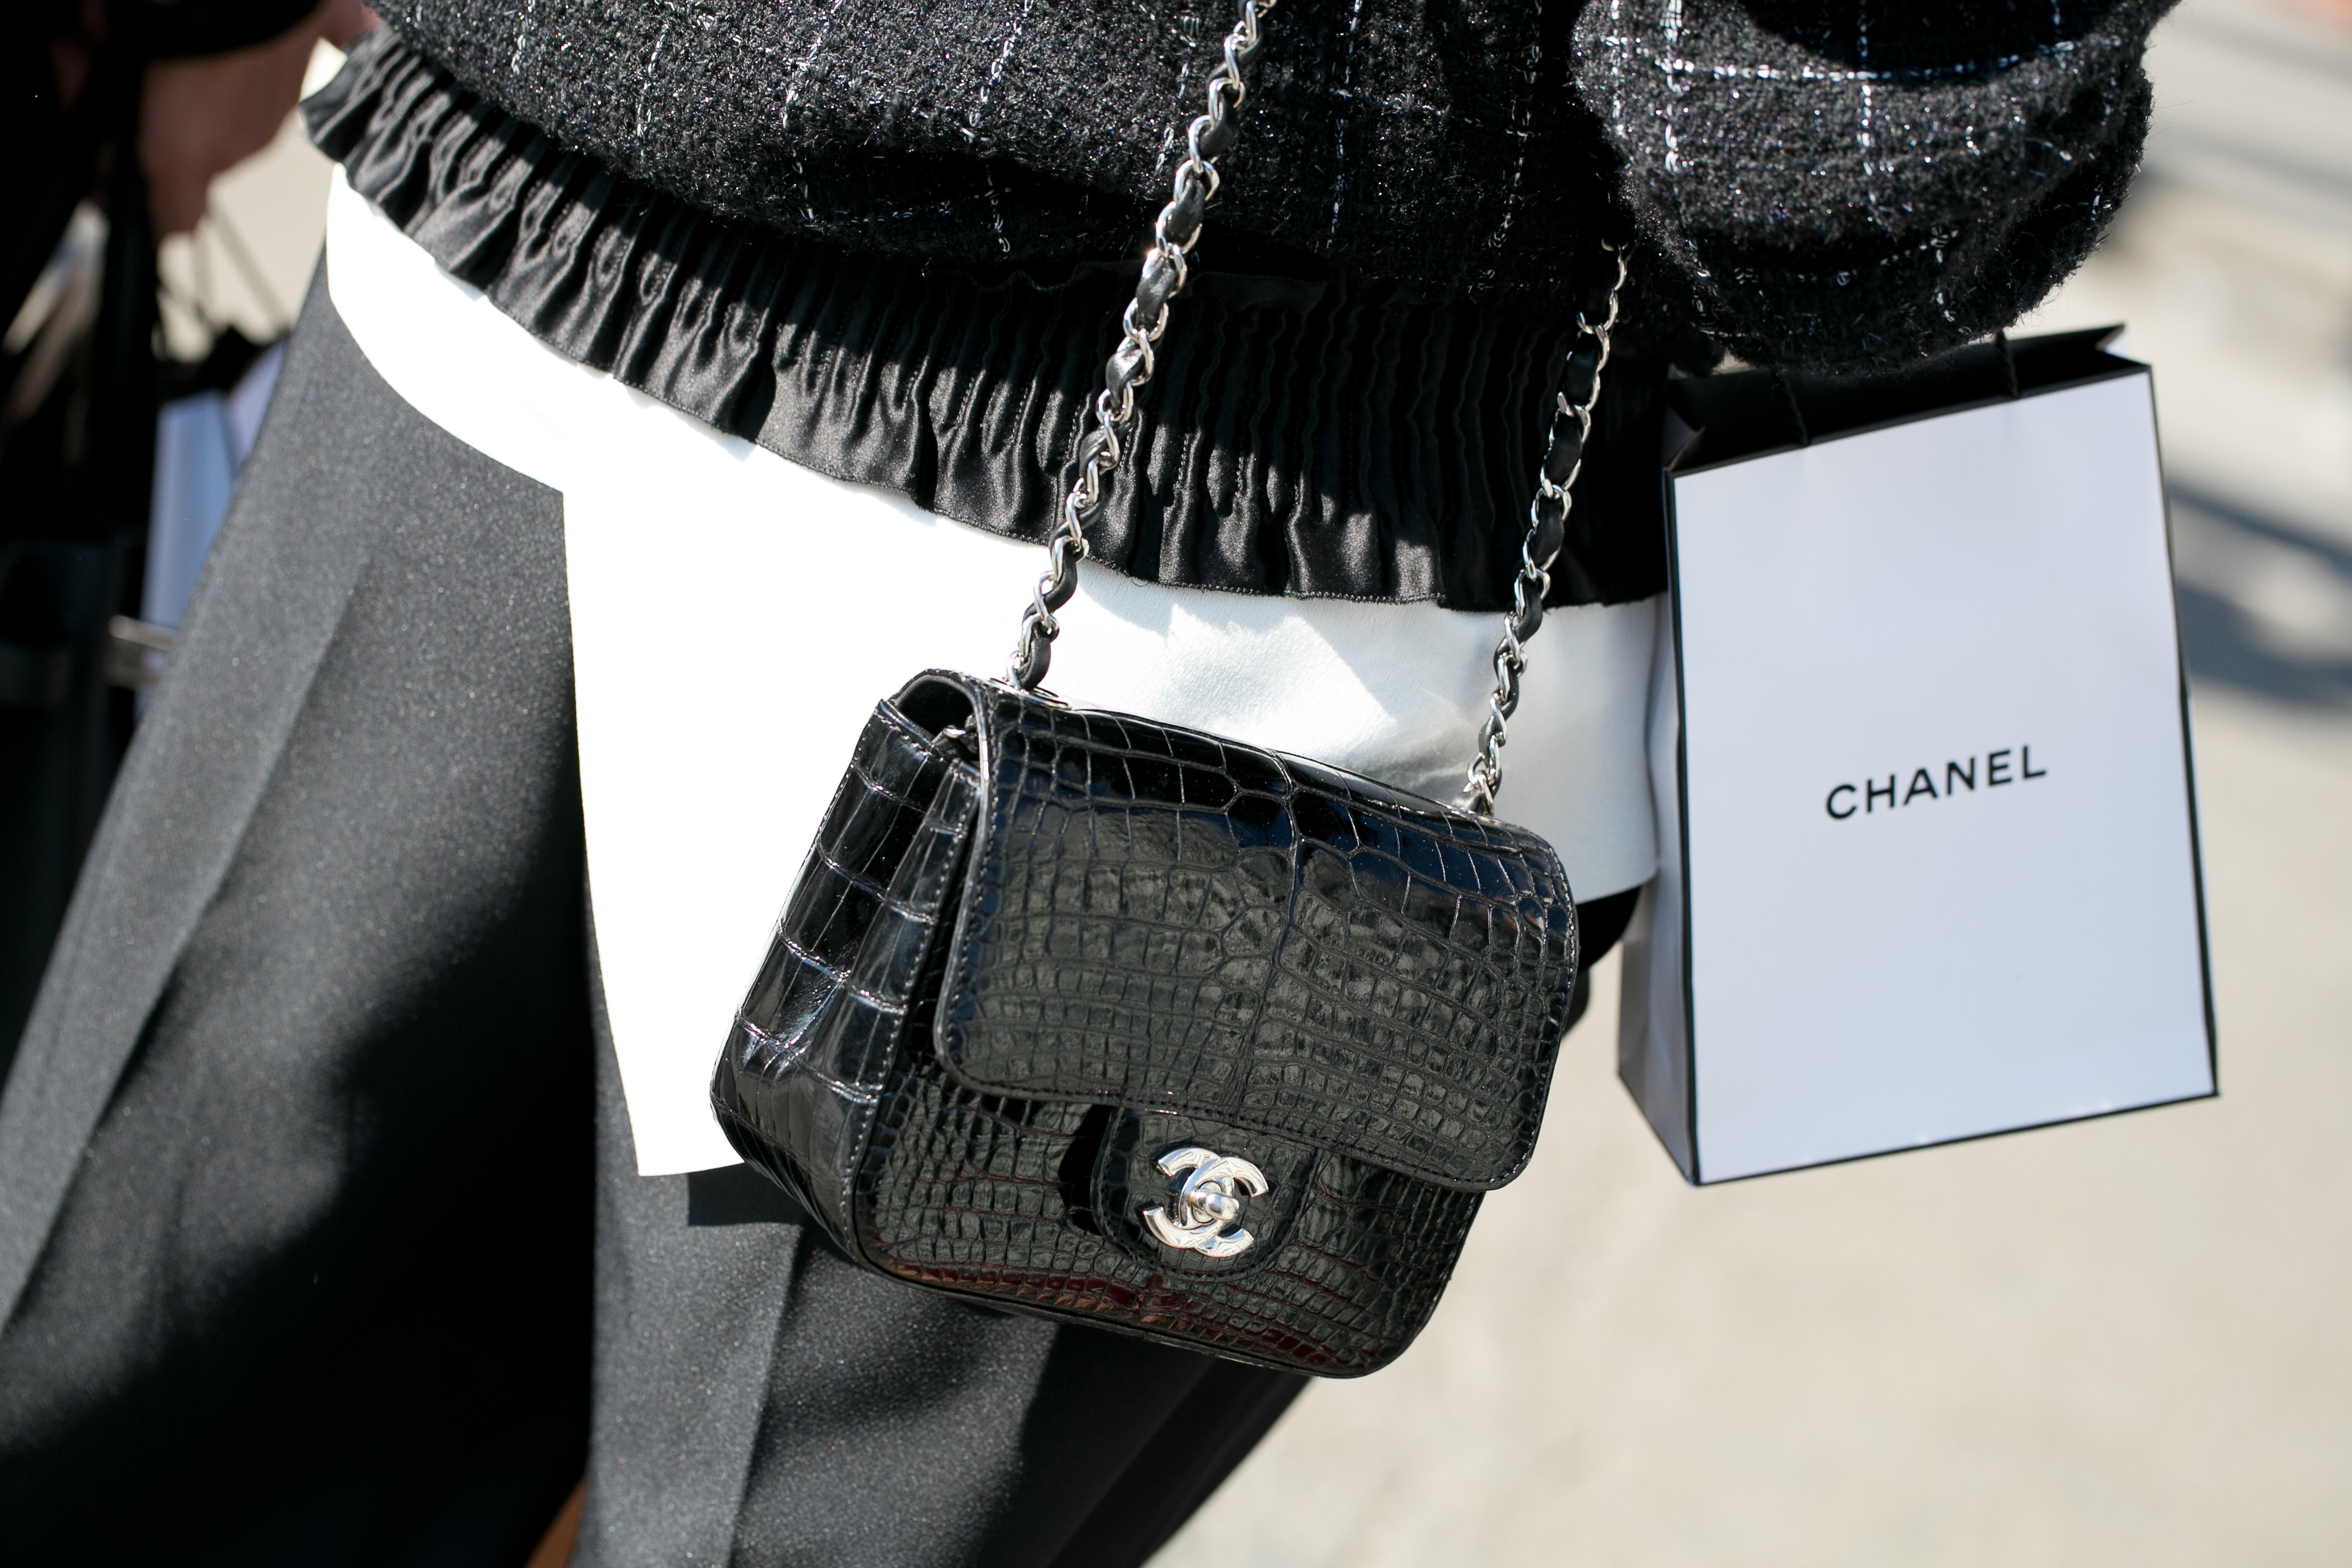 People line up to buy Chanel bags on rumors of price hikes - The Korea Times